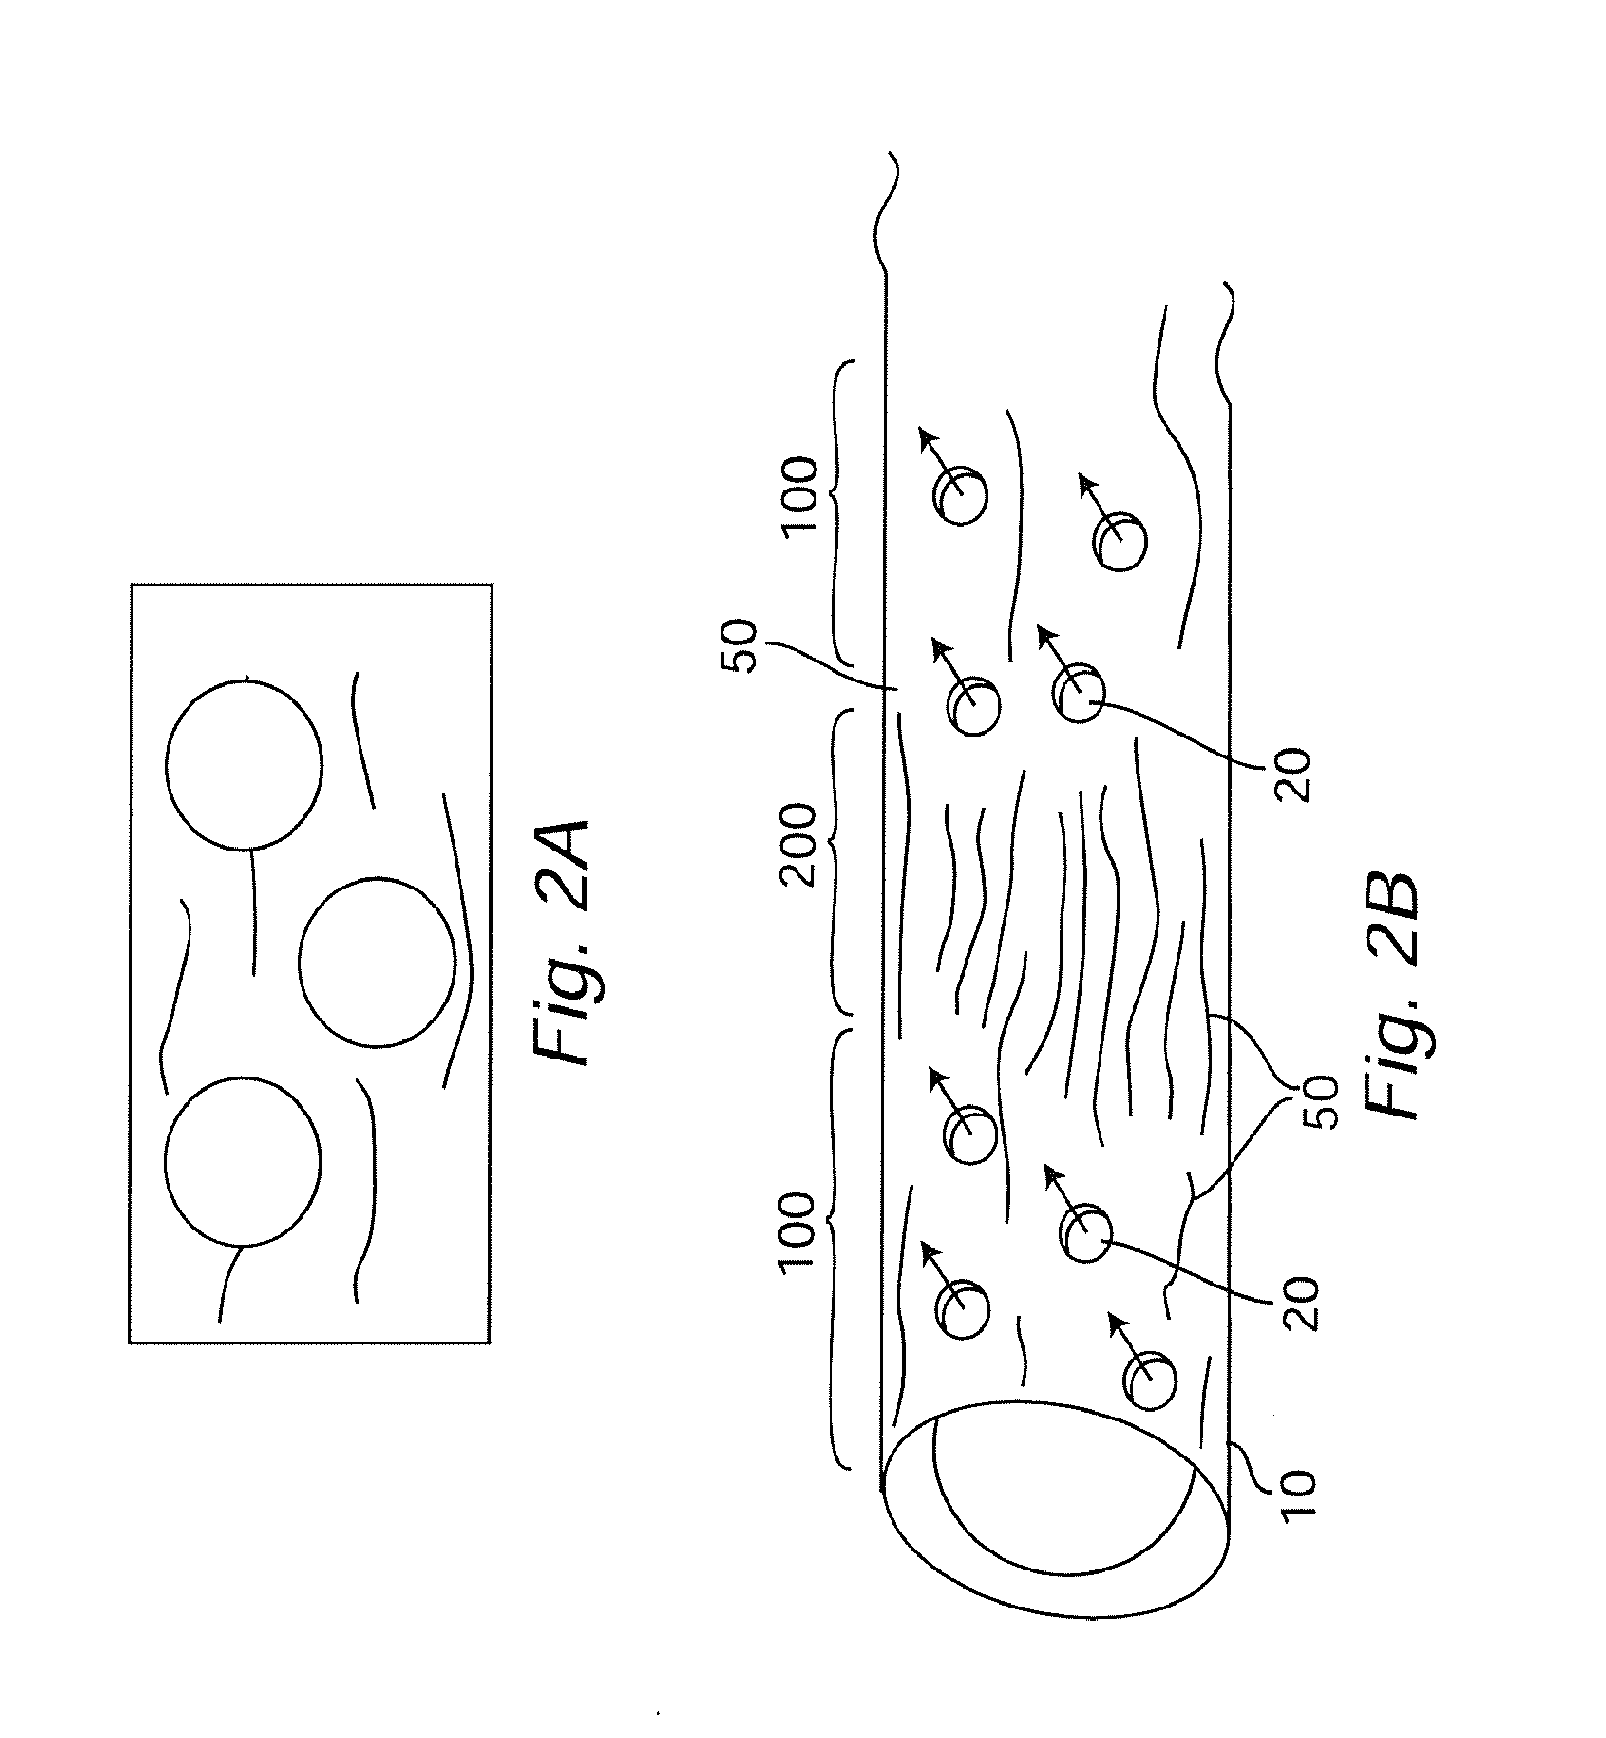 Air impedance electrospinning for controlled porosity